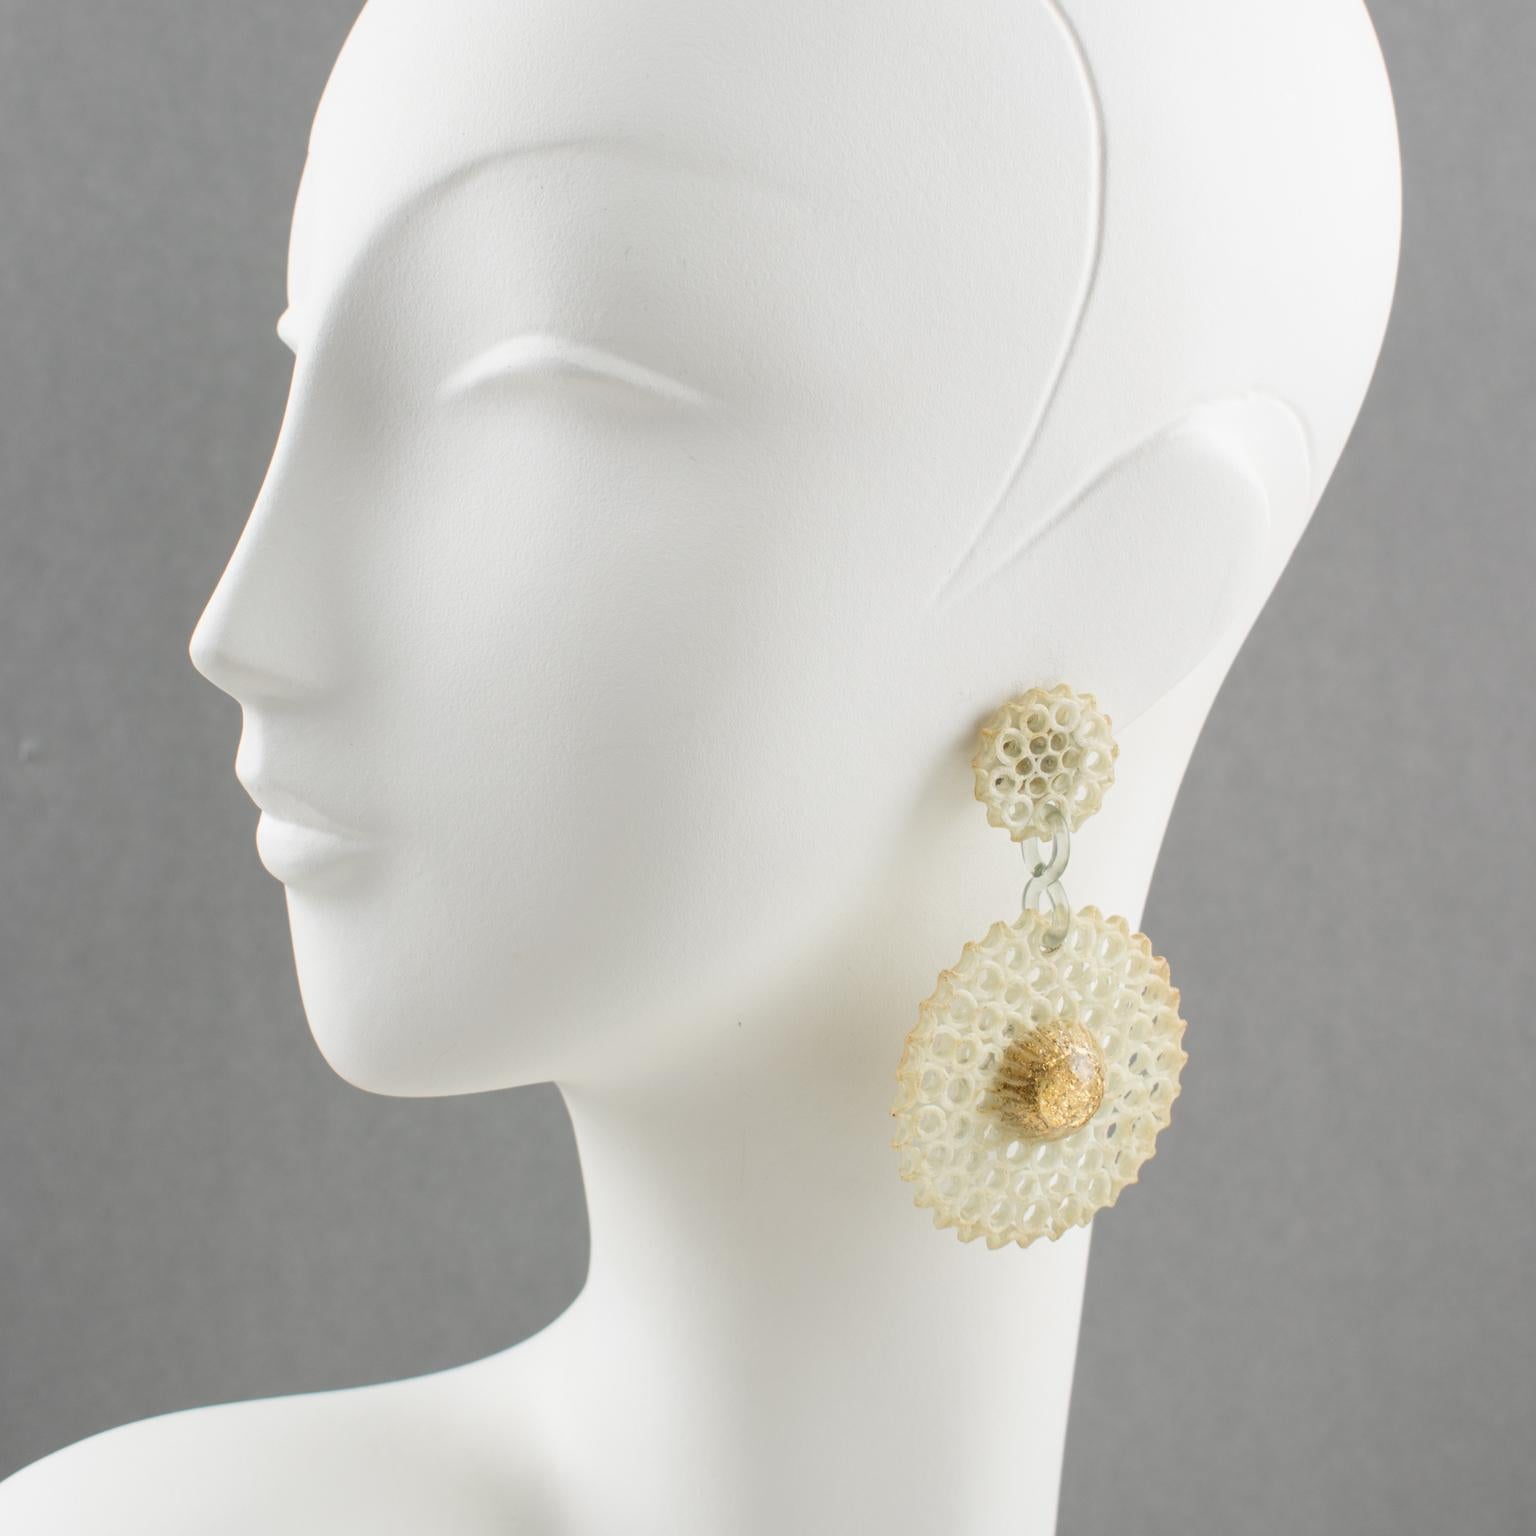 Refined Monique Vedie Talosel or resin clip-on earrings. Featuring floral dangling shape with a large disk with a textured pattern and see-thru carving like a sort of lace in an off-white color, topped with dimensional transparent resin cabochon